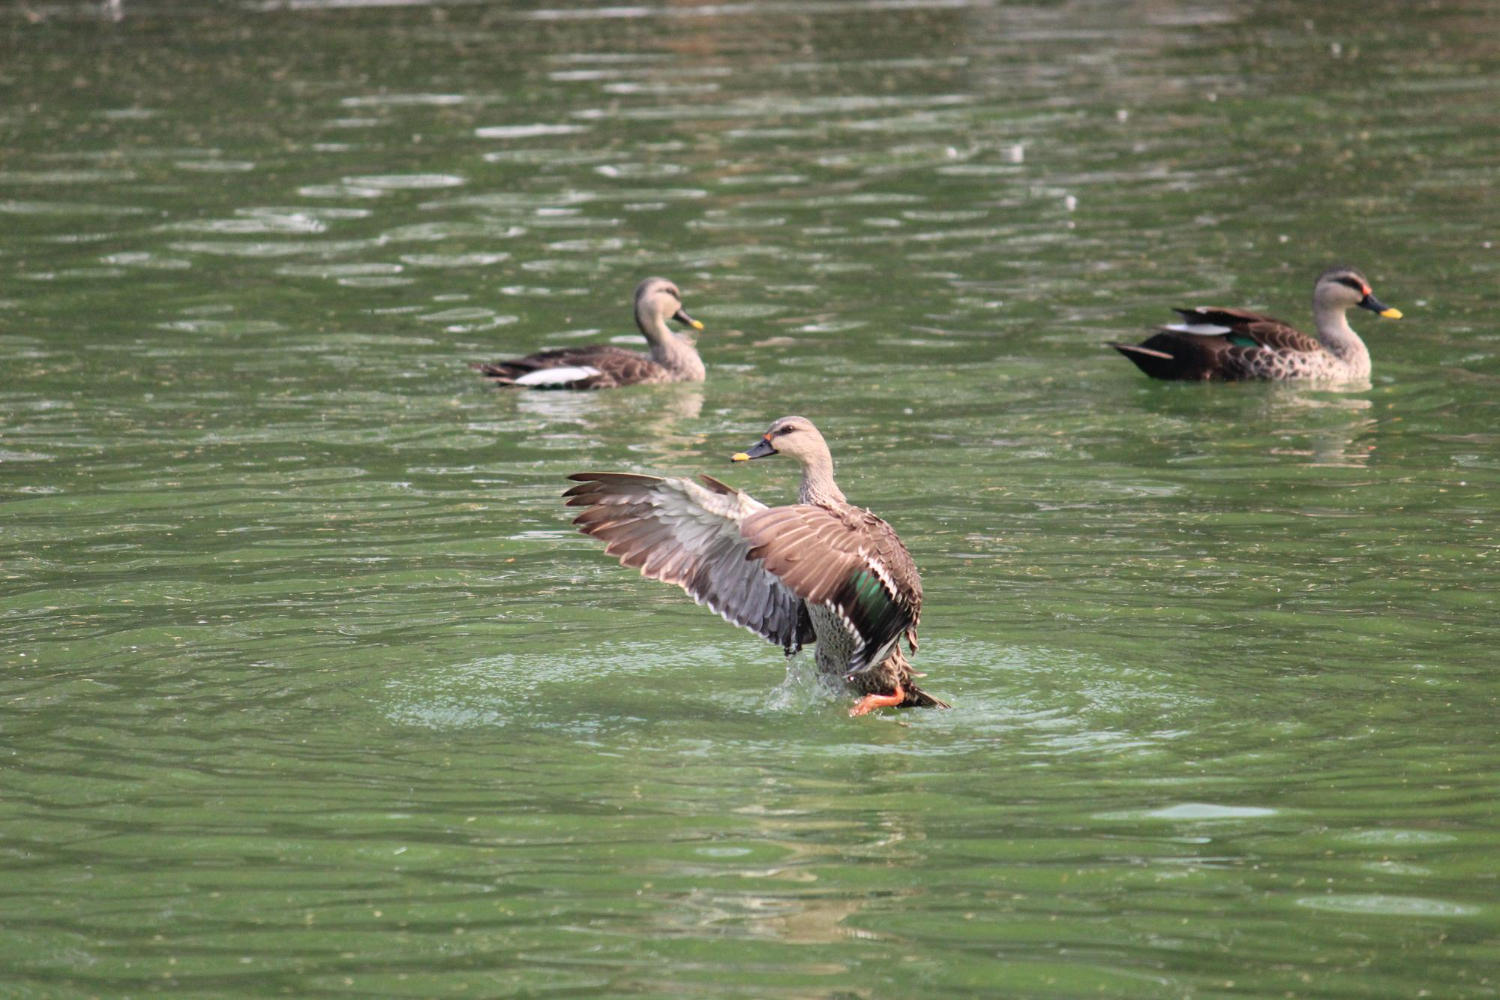 A duck flapping its wings on a pond